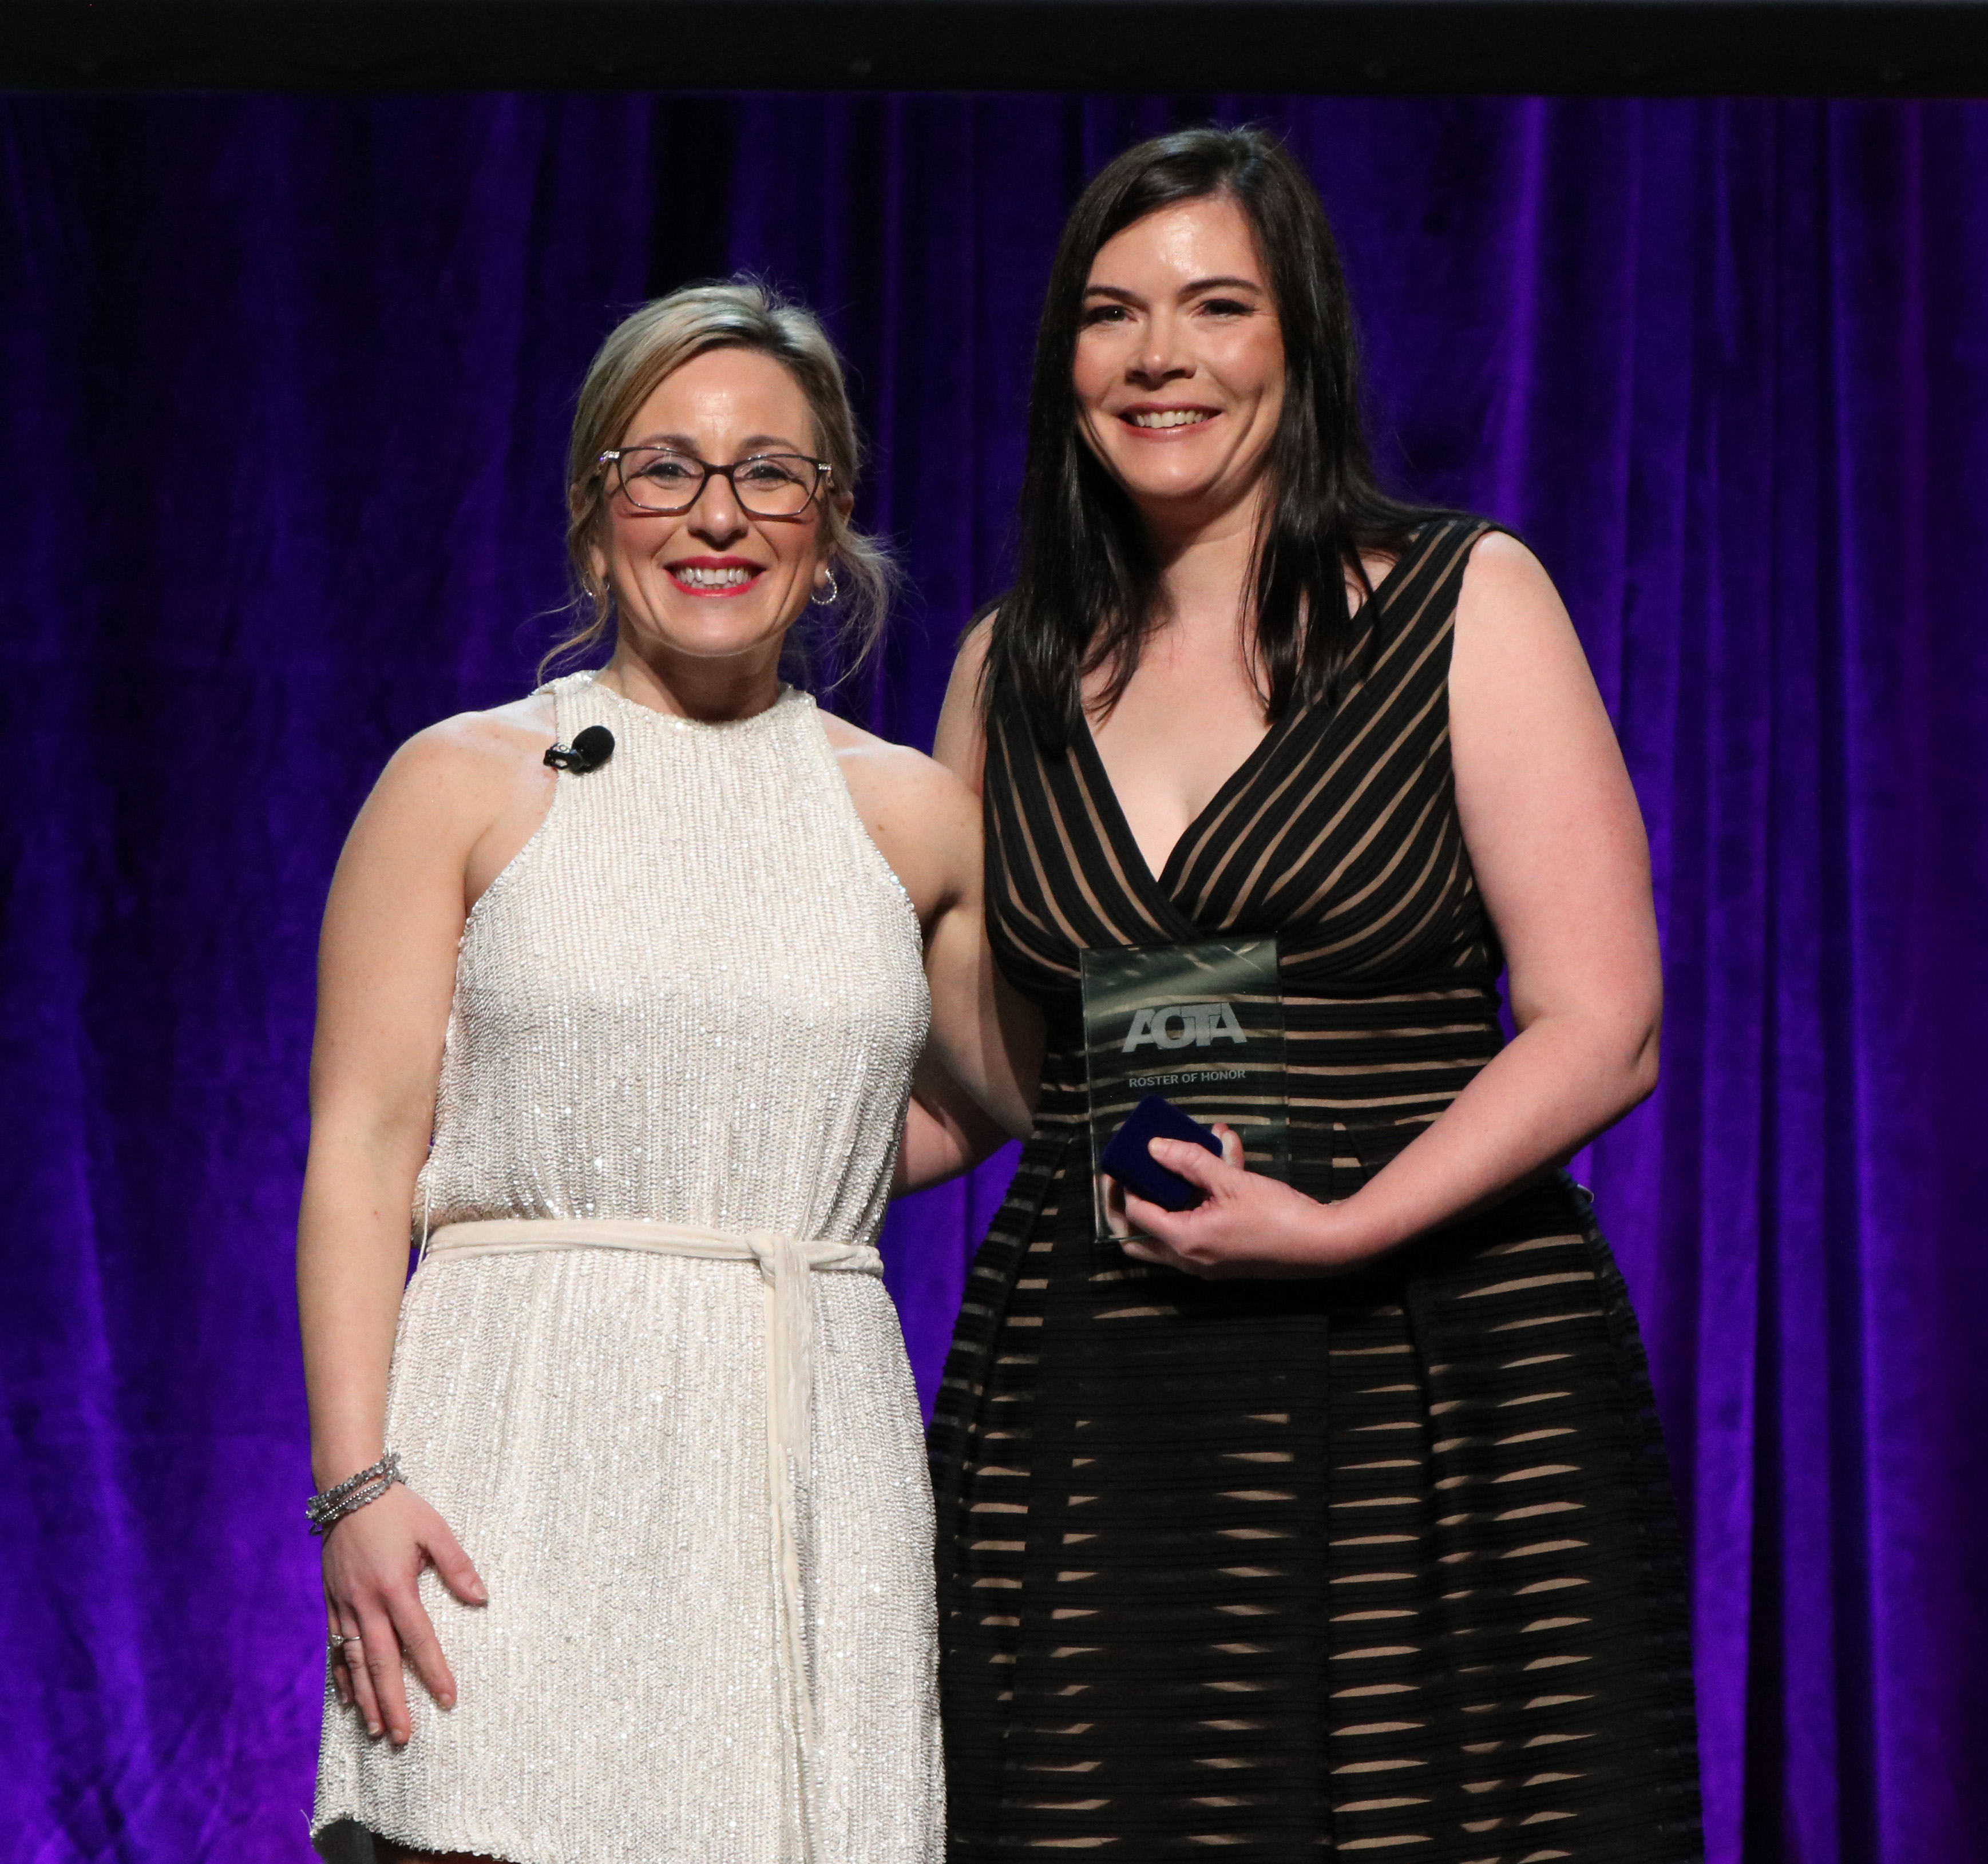 L&C Alumna Shannon White receives the Roster of Honor award from the American Occupational Therapy Association (AOTA). On left, President of the AOTA Alyson Stover, MOT, JD, OTR/L, BCP. Photo provided by Shannon White